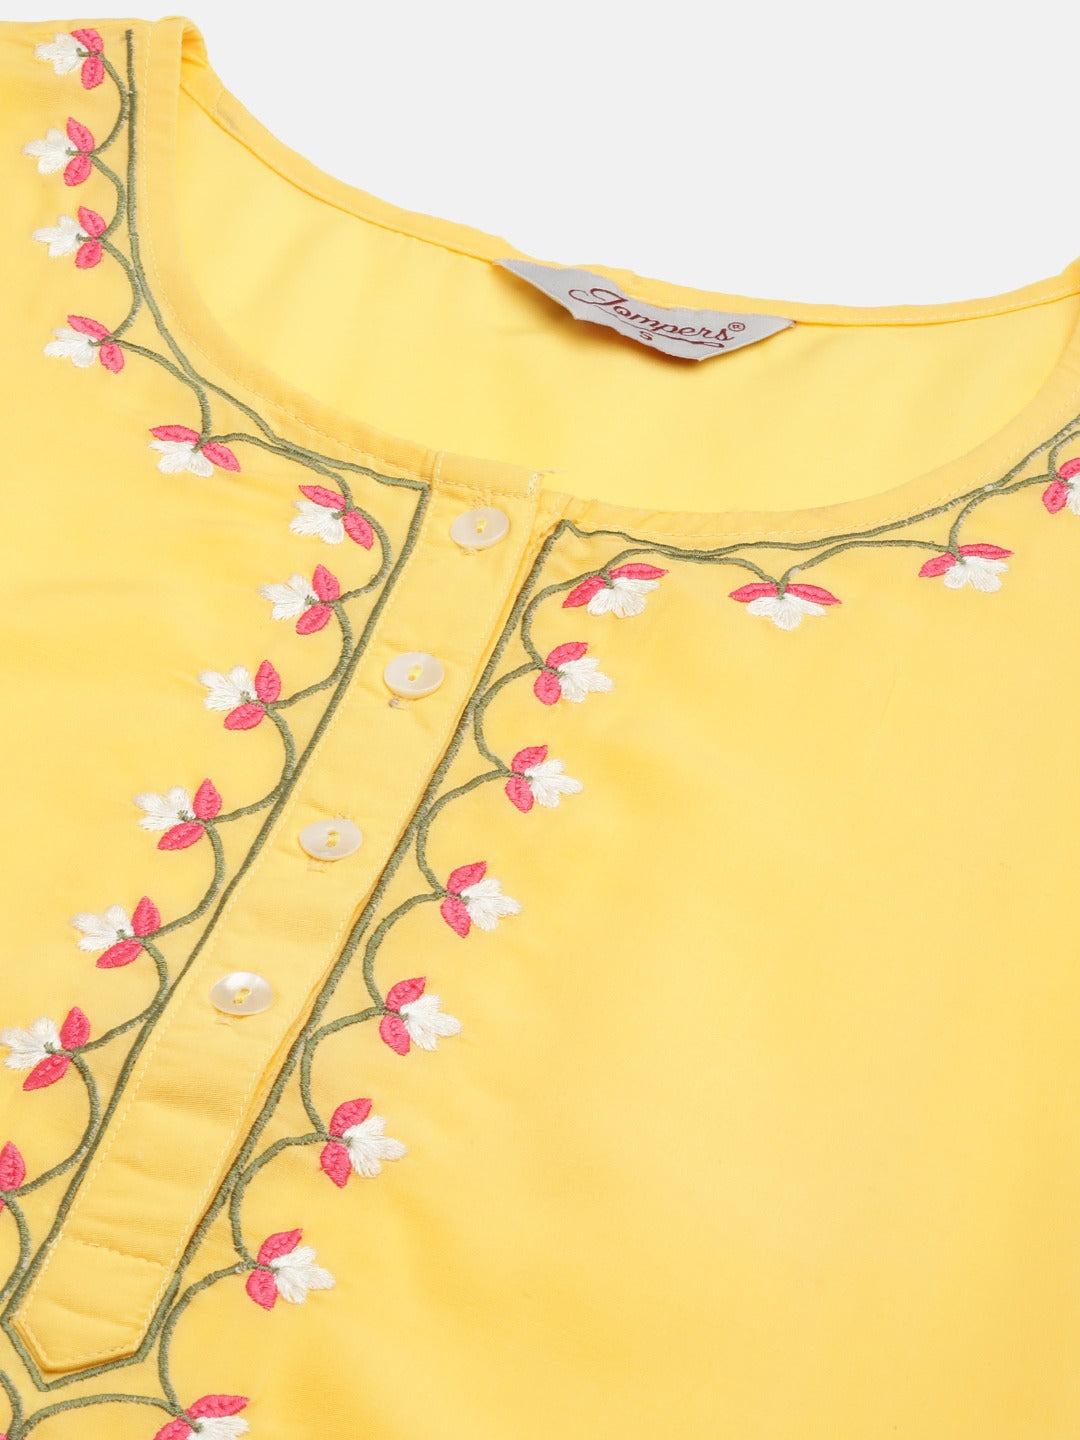 Women's Yellow Embroidered Regular Kurta with Trousers & With Dupatta ( JOKS D30 1361 Yellow ) - Jompers